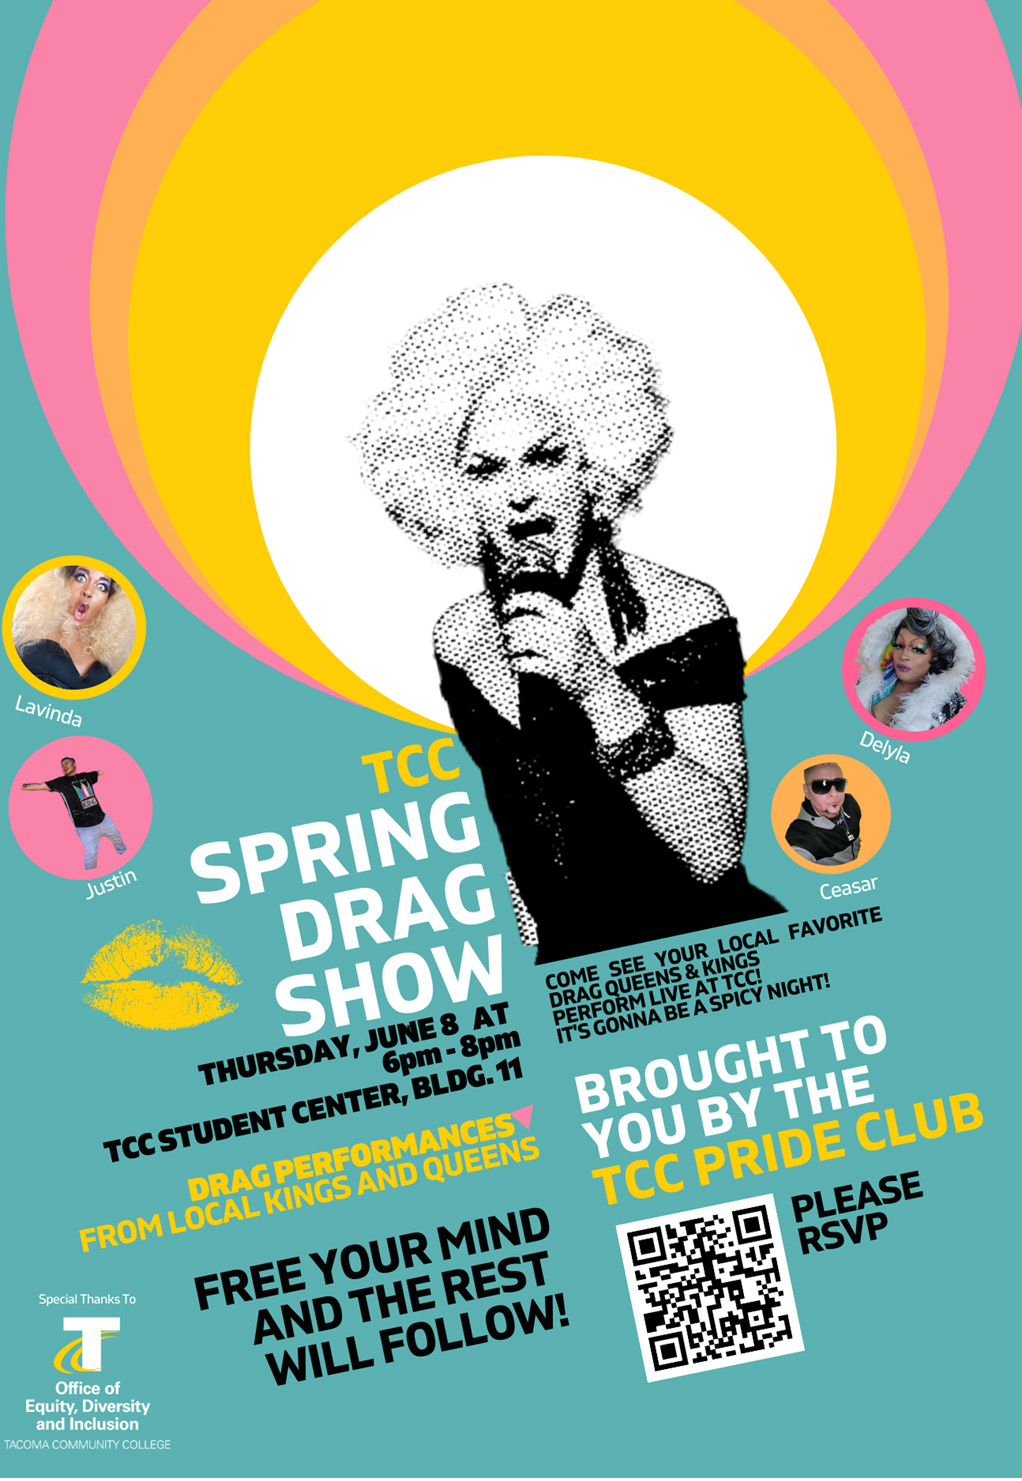 Drag show poster with a performer holding a mic. Drag Show June 8, 6-8 p.m. QR code to register